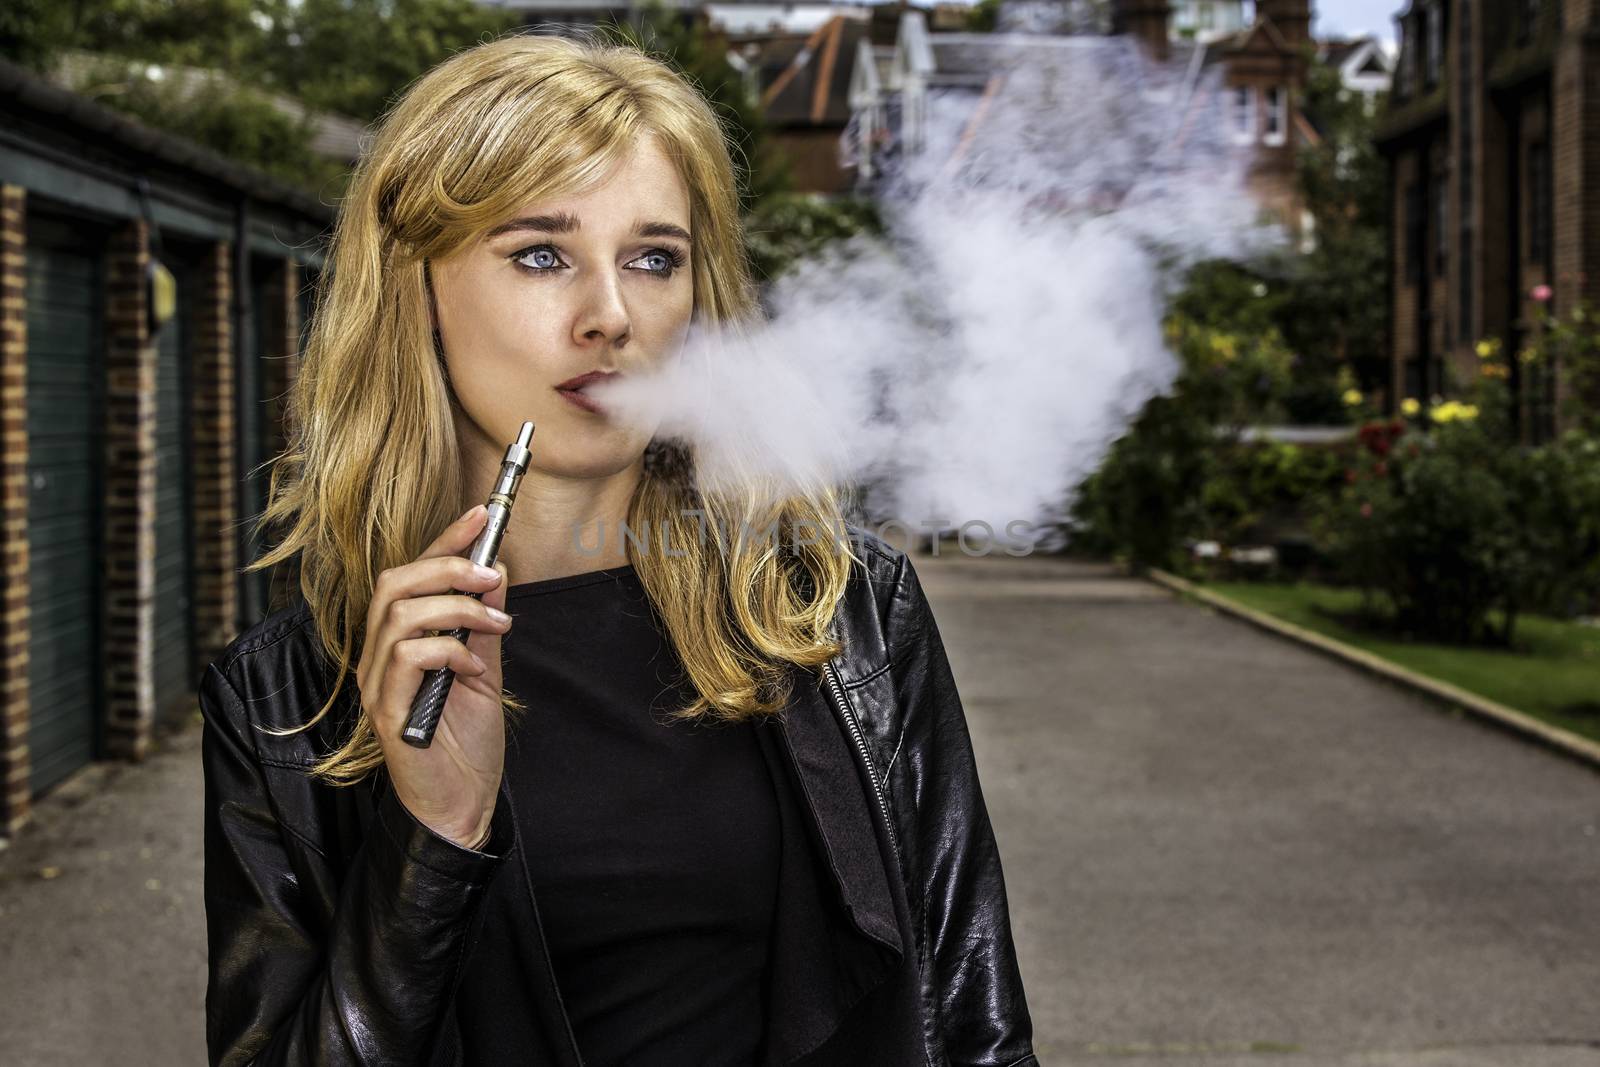 Pretty blond woman smoking an e-cigarette standing in a street in a leather jacket exhaling a cloud a smoke from her mouth while looking off to the side